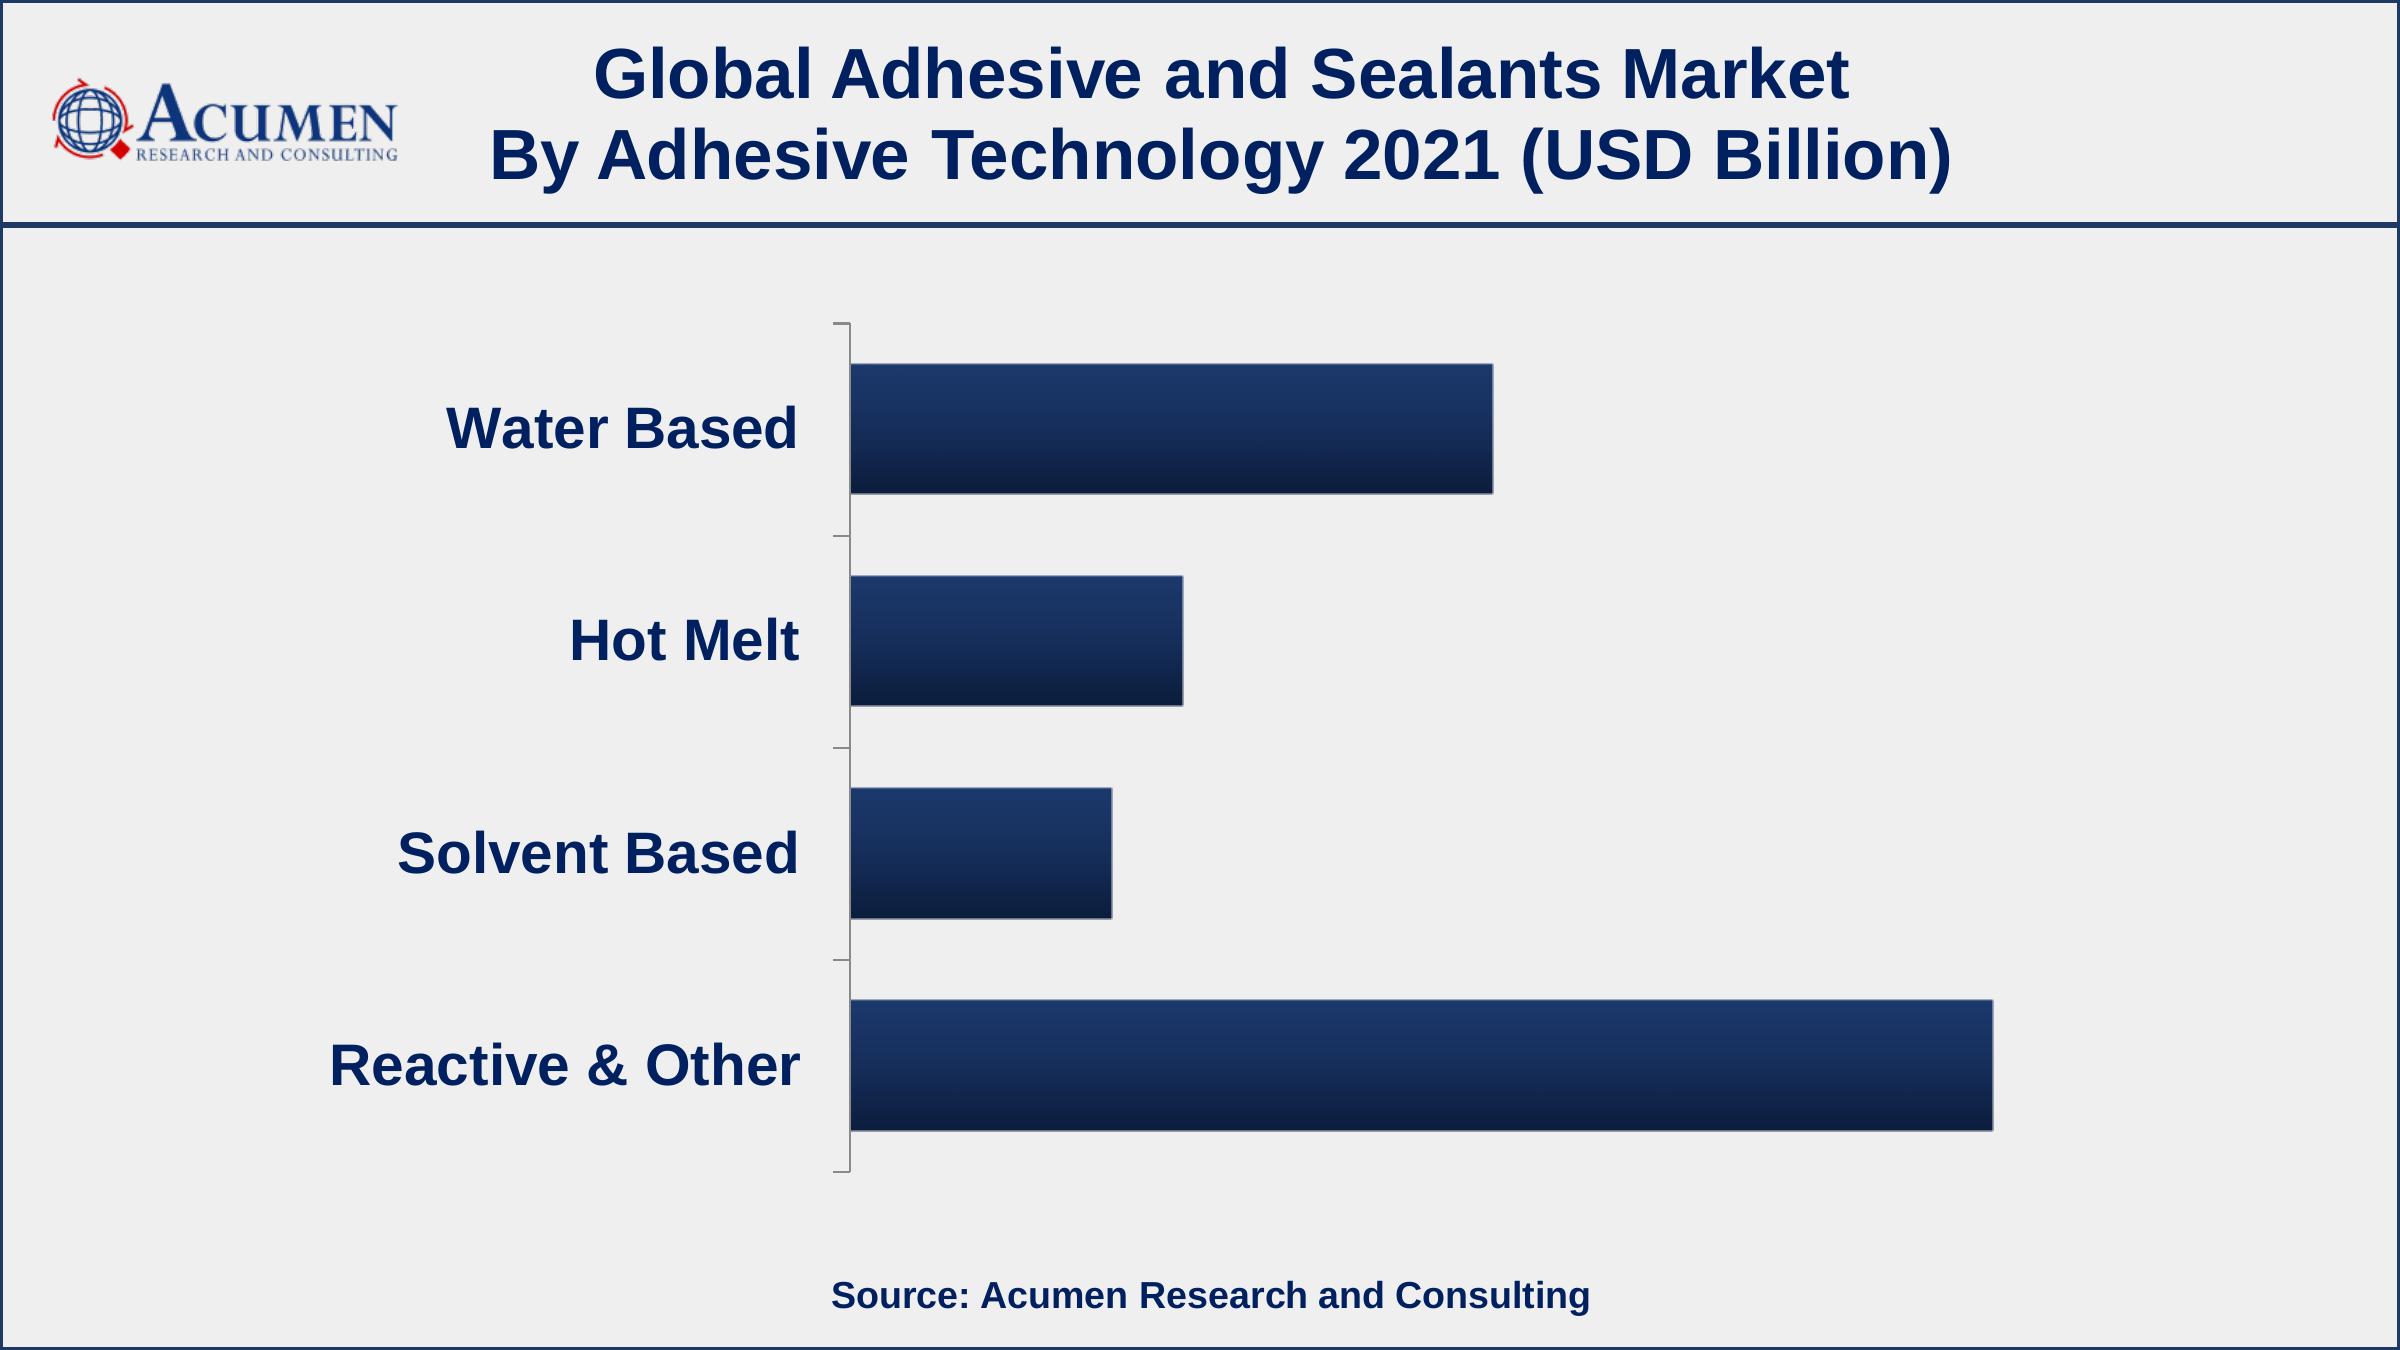 By adhesive technology, reactive & others segment generated about 48% market share in 2021